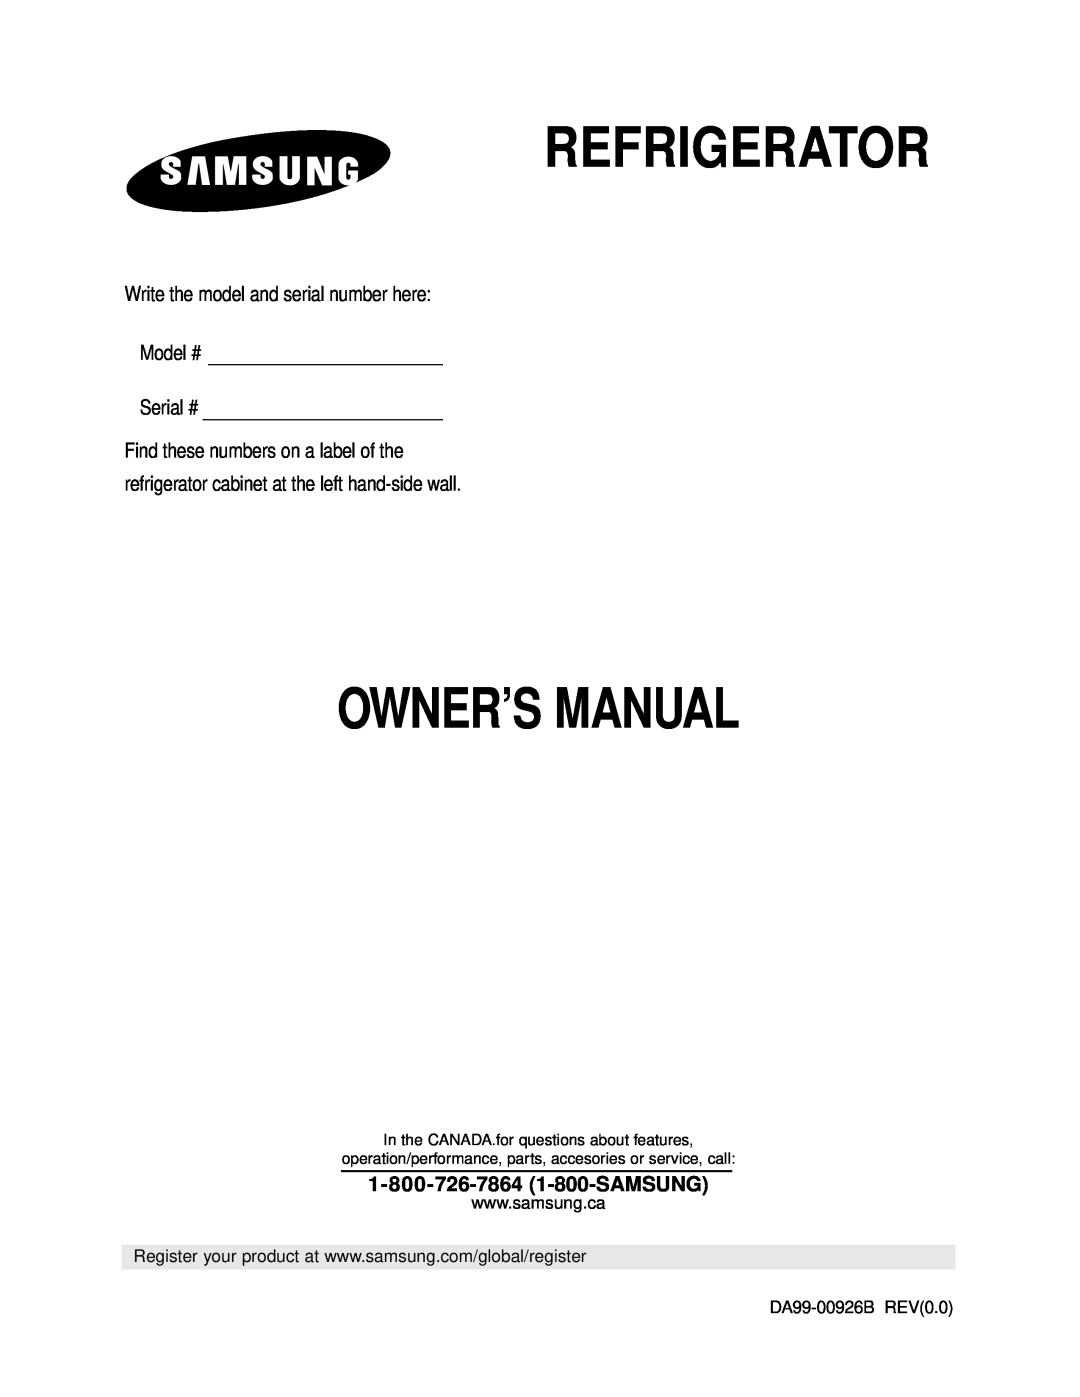 Samsung RB193KASB owner manual Write the model and serial number here Model # Serial #, Refrigerator 